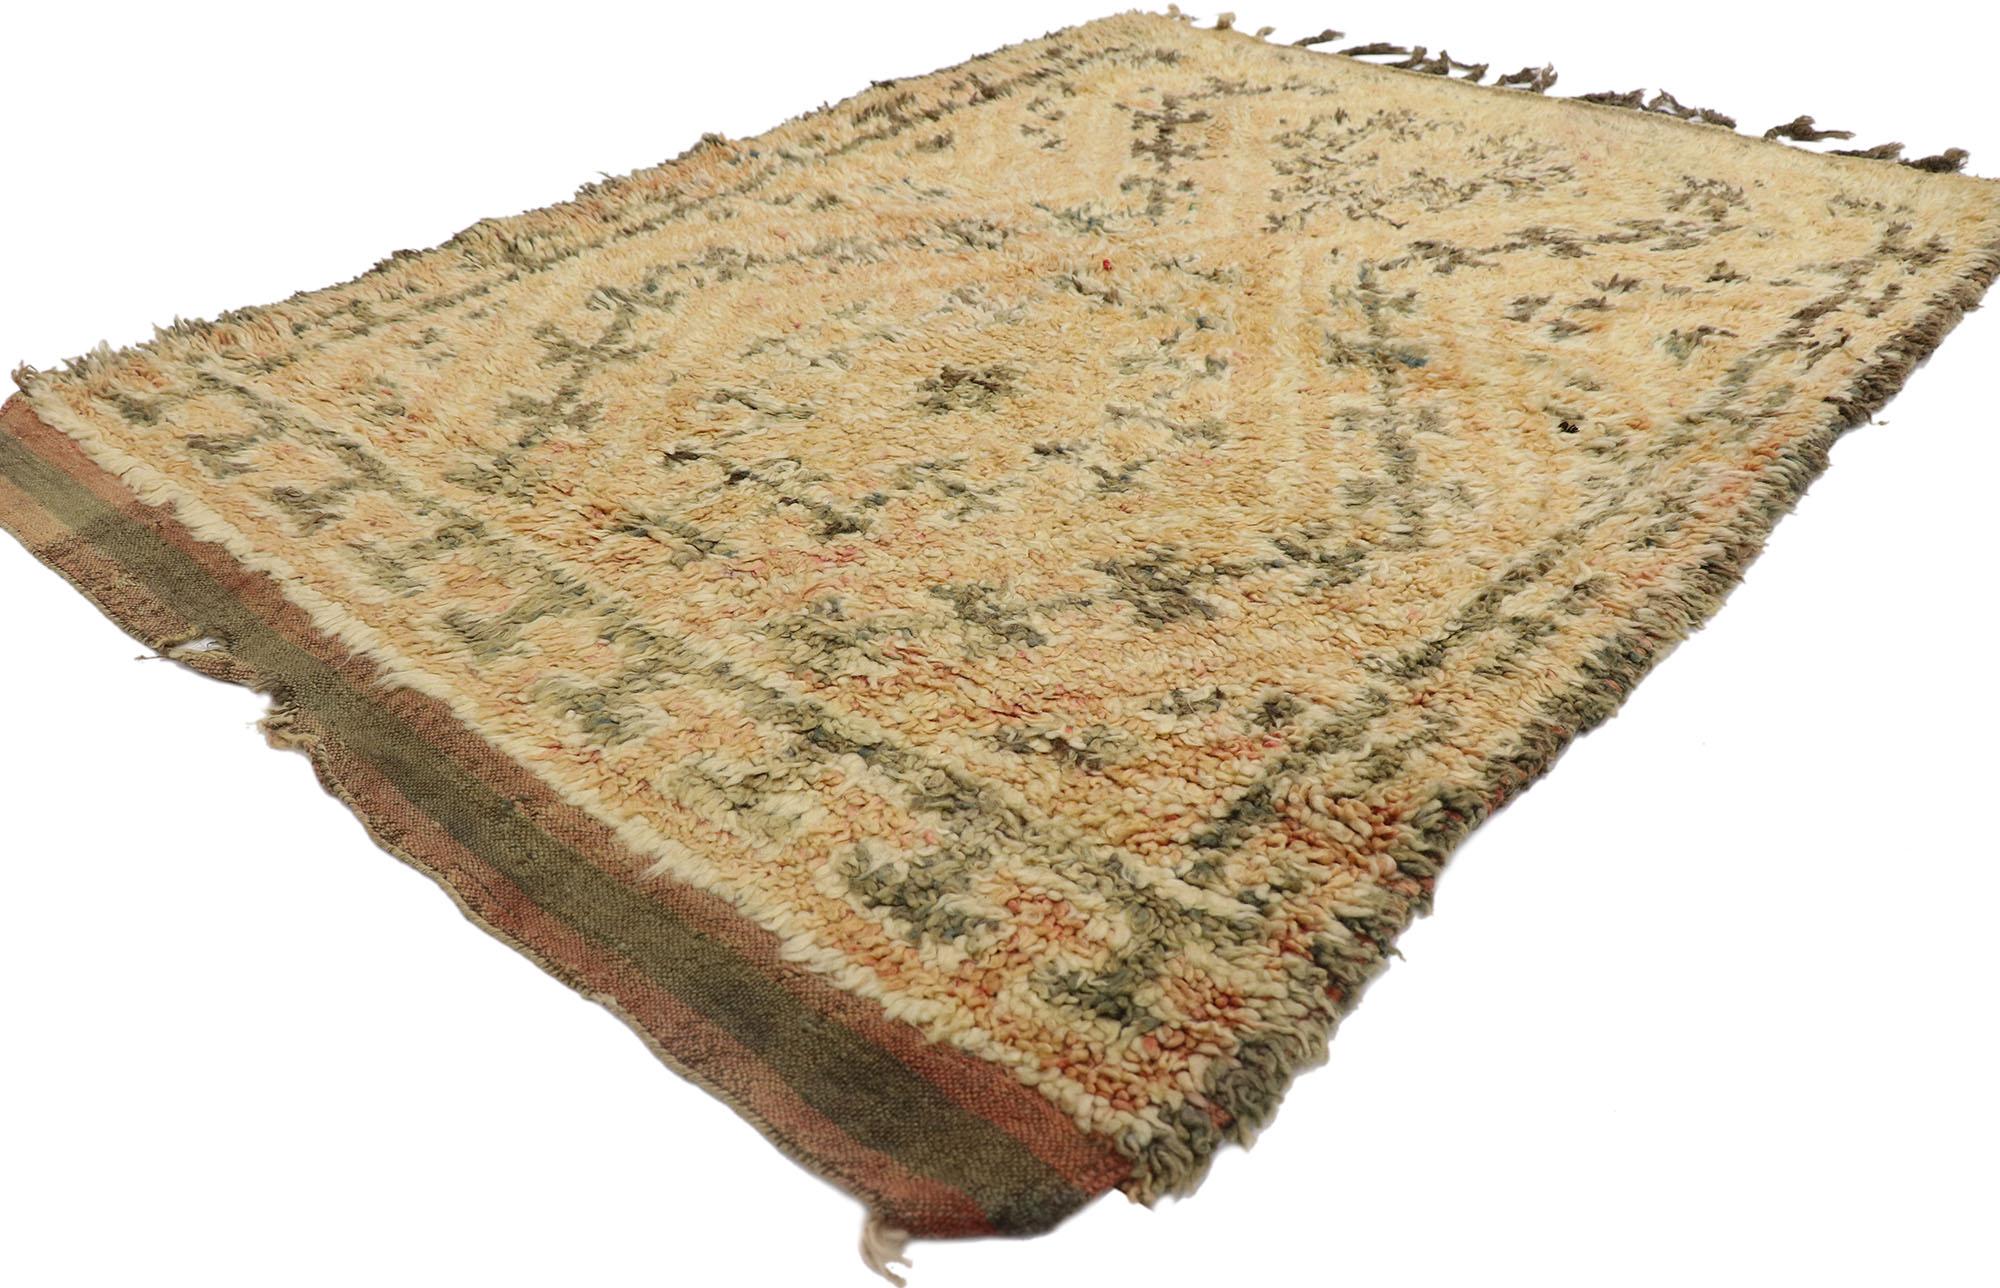 21555 Vintage Berber Moroccan Rug, 03'08 x 05'02.
Emanating tribal style and neutral boho chic with incredible detail and texture, this handwoven wool vintage Berber Moroccan rug is a captivating vision of woven beauty. The eye-catching tribal